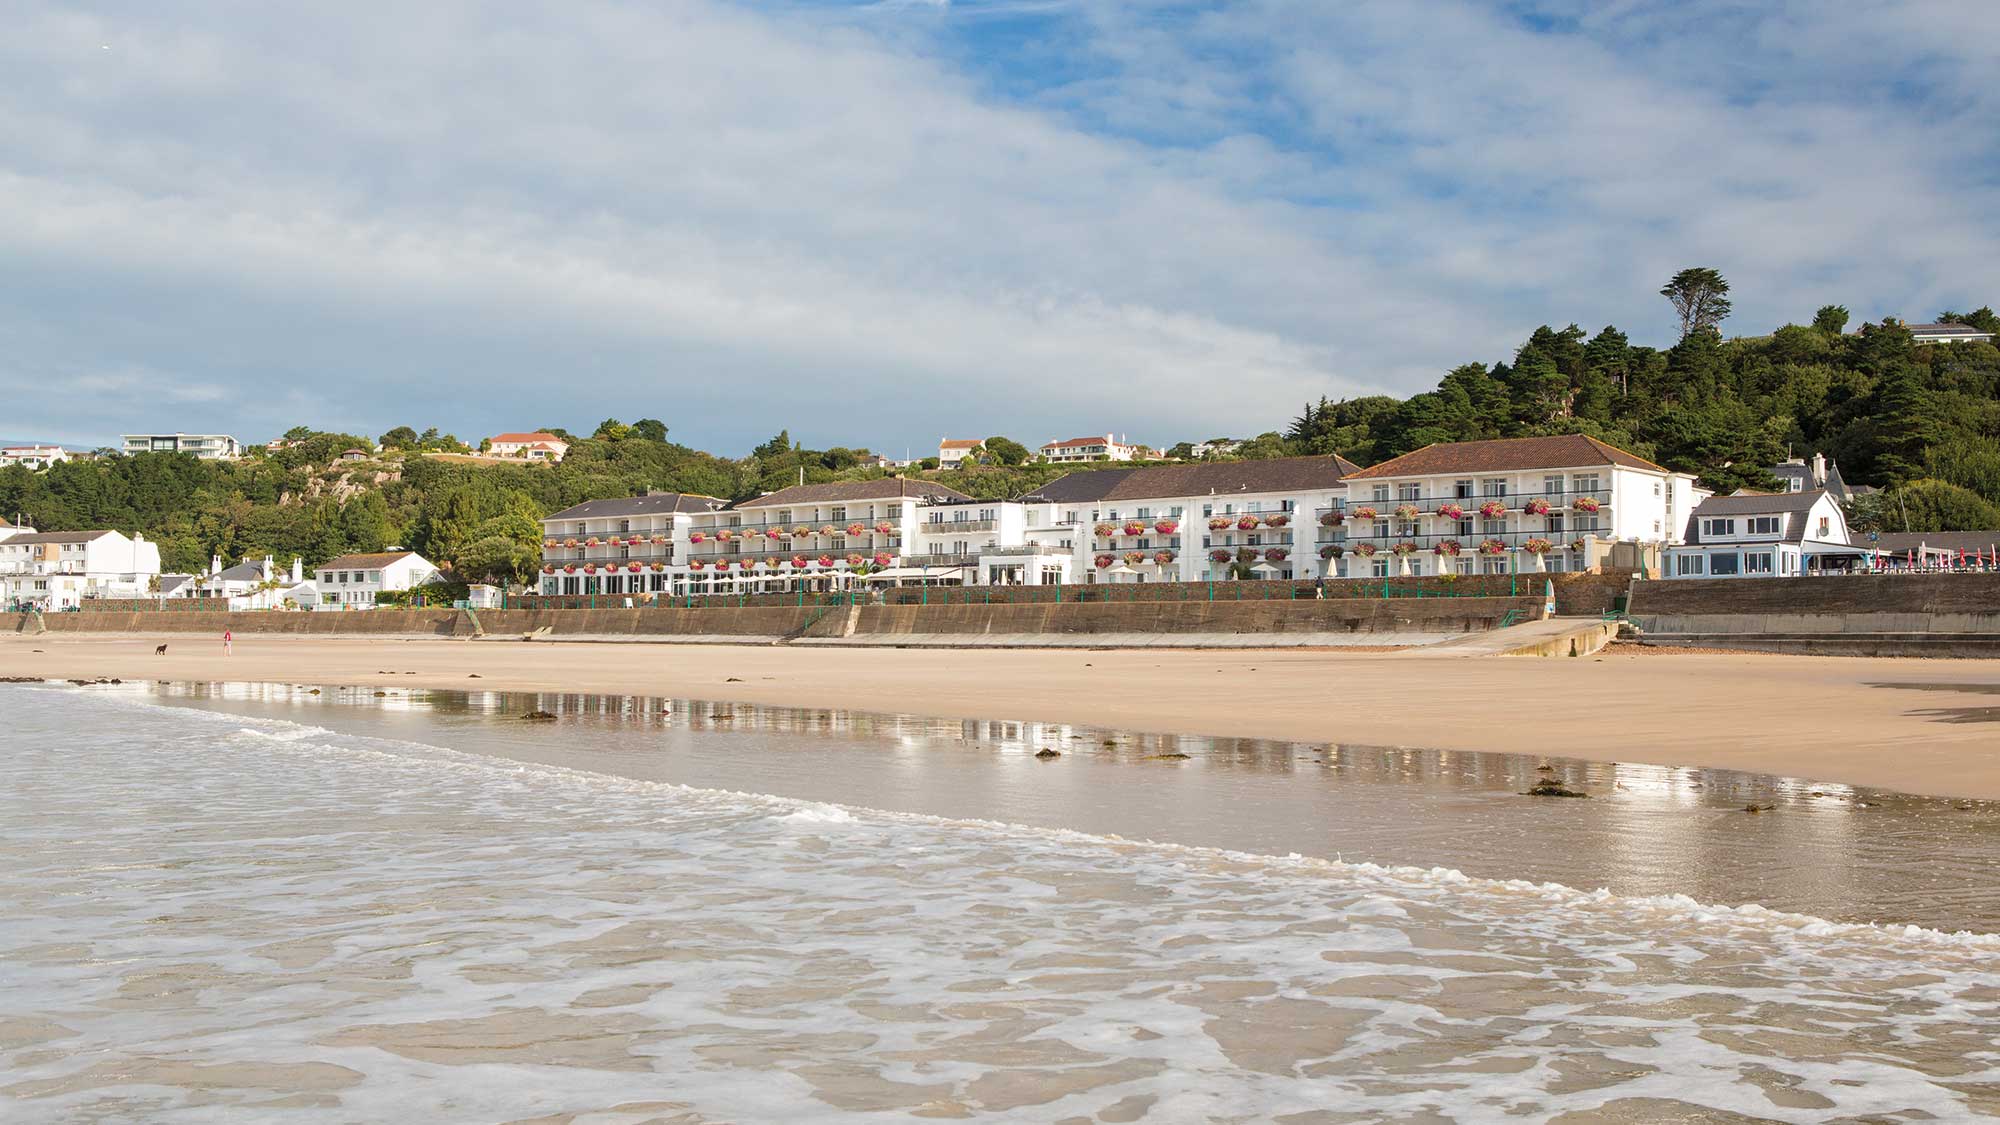 places to stay in jersey uk